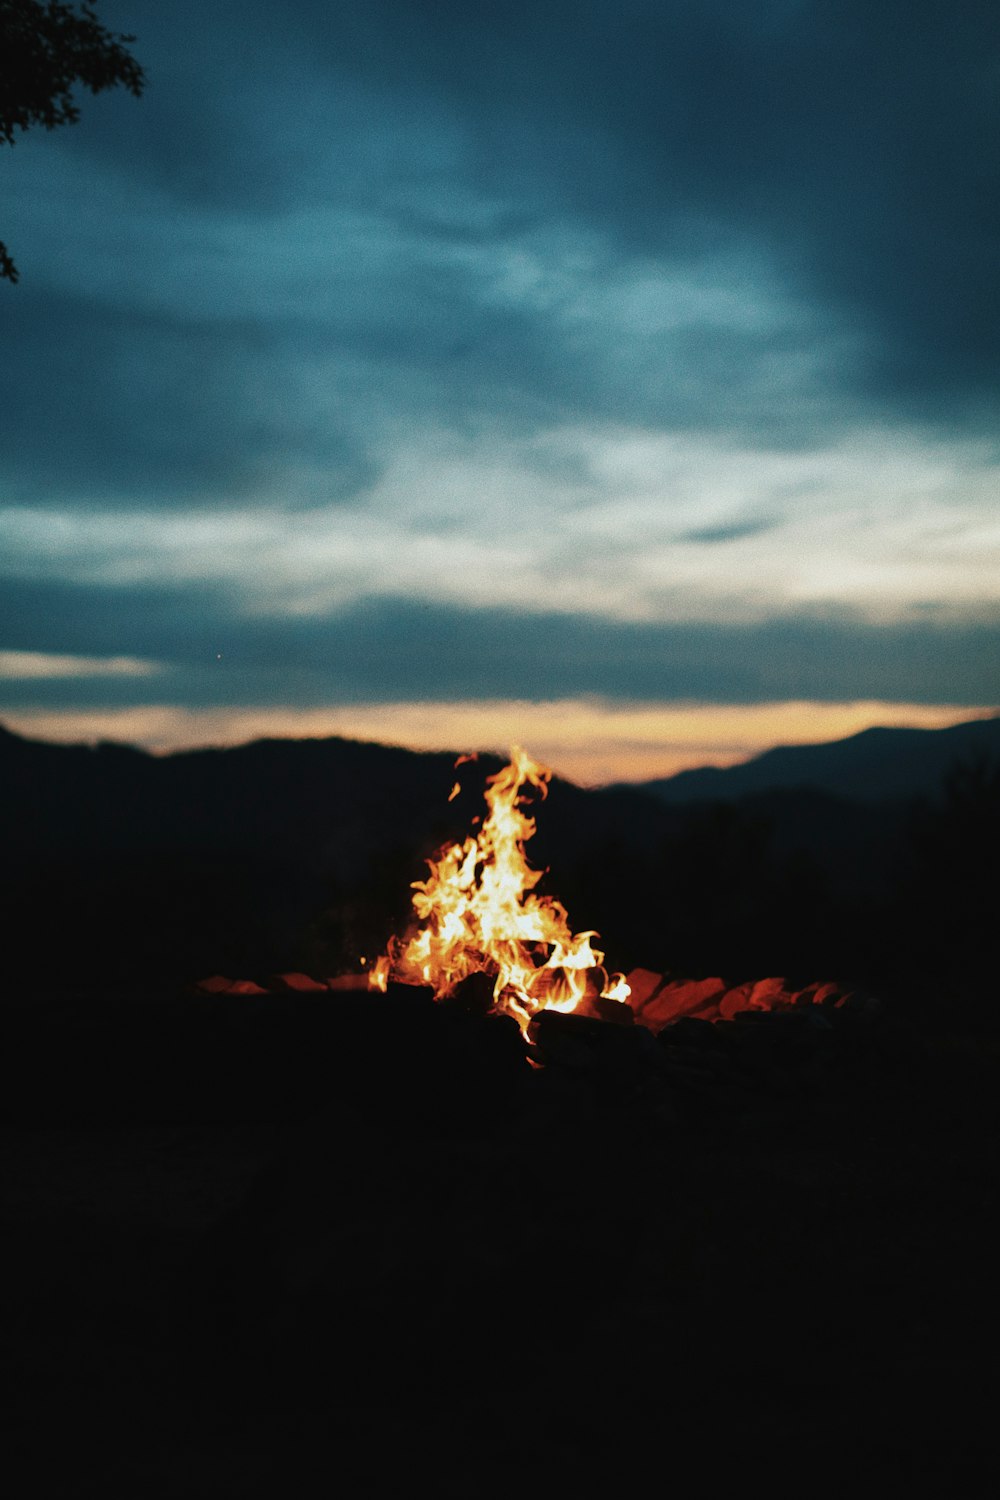 photography of bonfire during nighttime